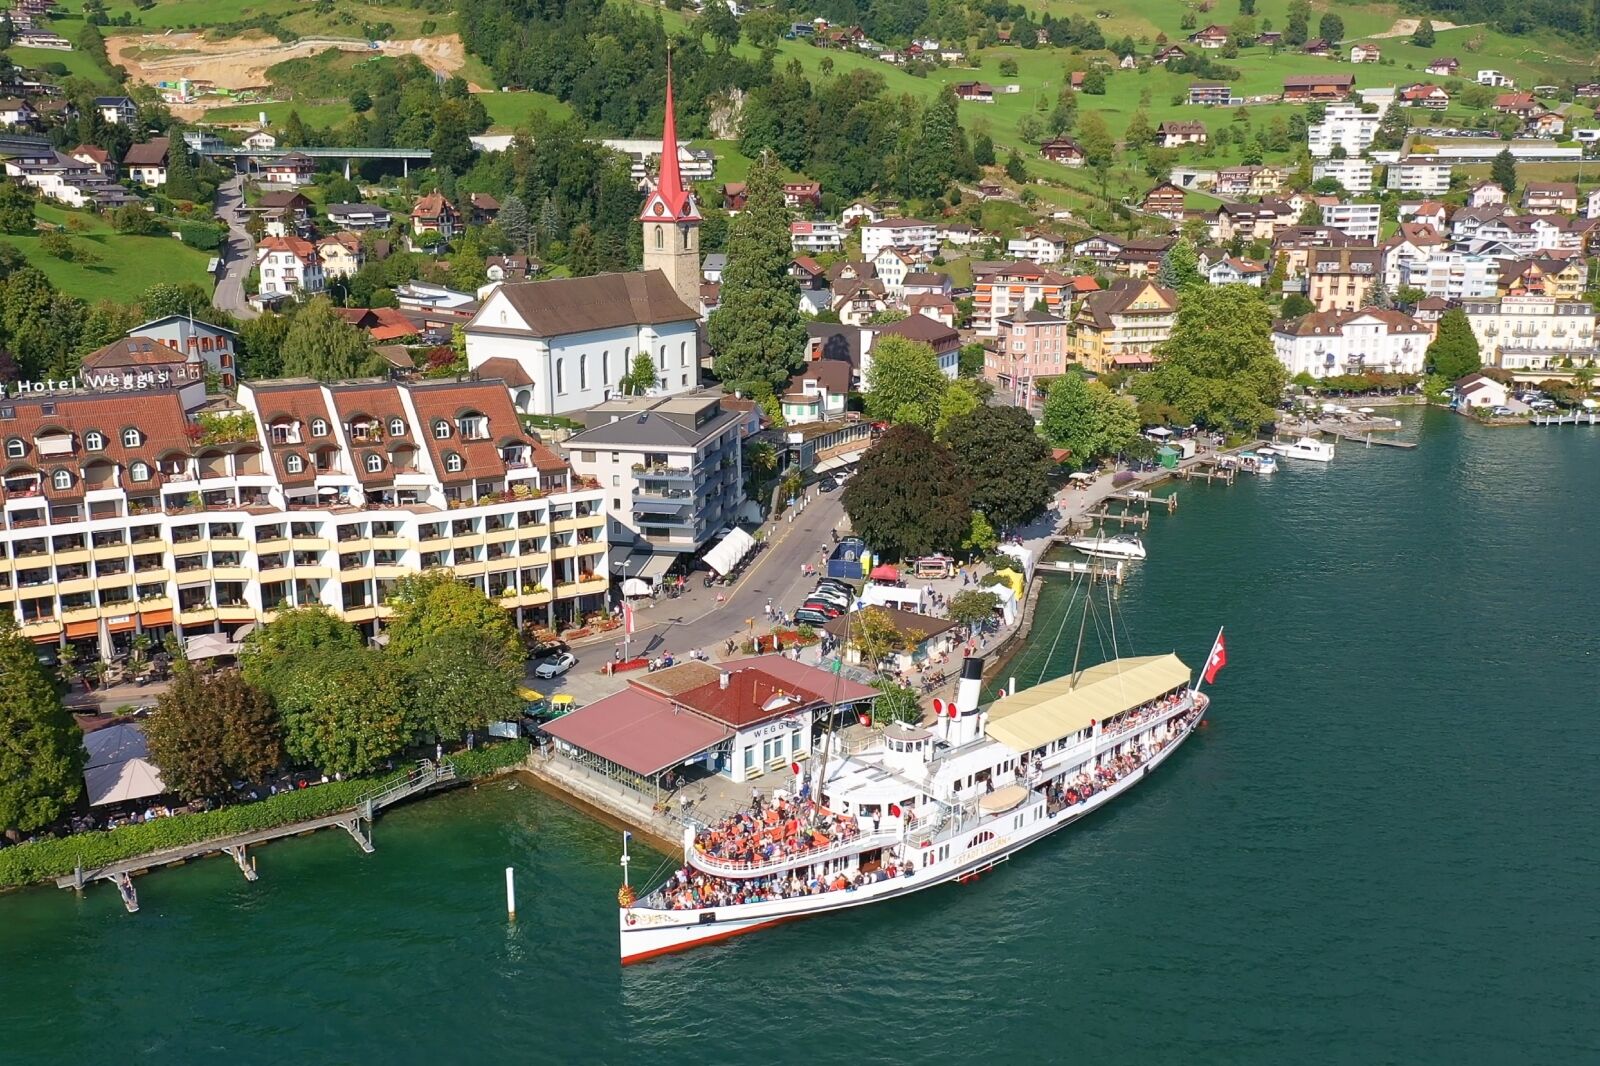 Stadt Luzern, flagship steamer of Lake Lucerne free with Swiss Travel System pass